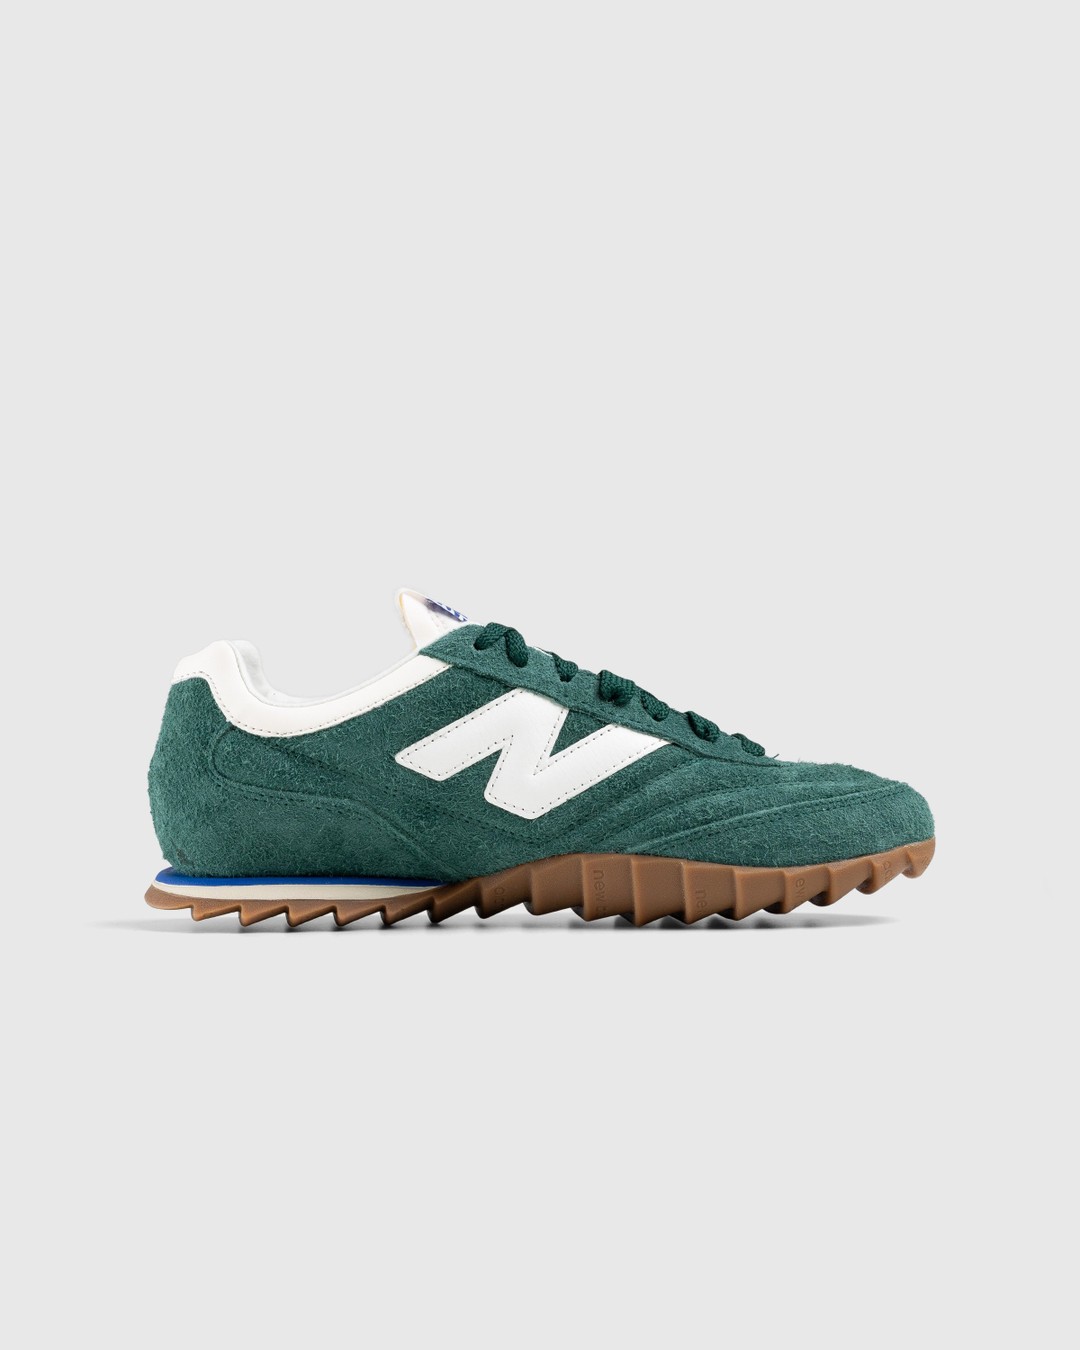 New Balance – URC30RC Nightwatch Green - Low Top Sneakers - Green - Image 1